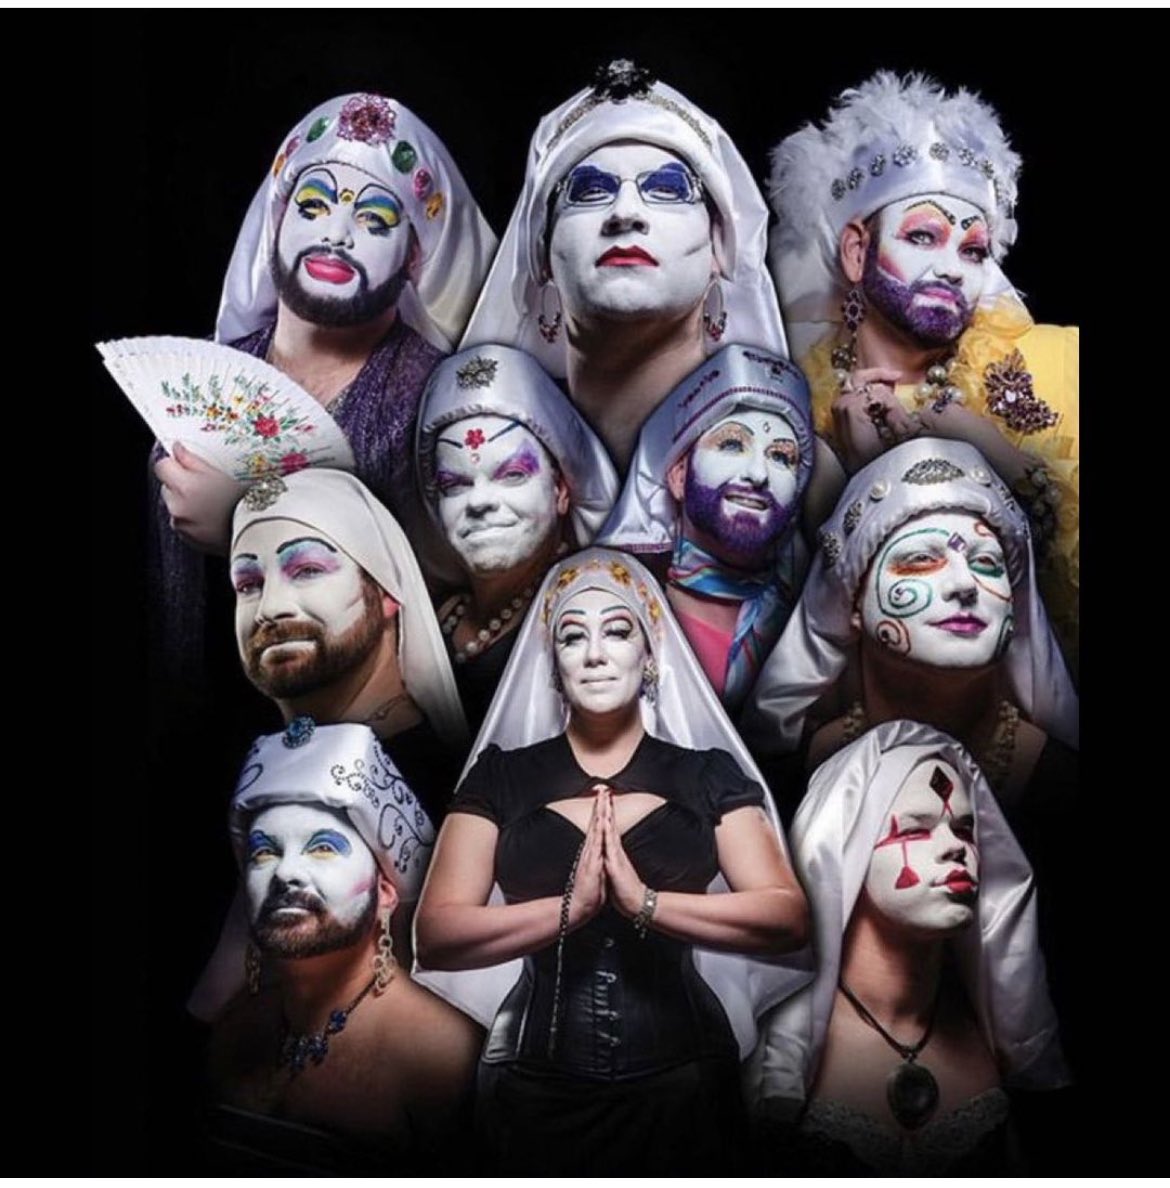 Are we REALLY surprised to find out disgraceful Biden Administration official is a member of this blasphemous group, the order of perpetual indulgence? Yep, bottom right is good old women’s suitcase stealer Sam Brinton. #dodgershatecatholics #BoycottDodgers